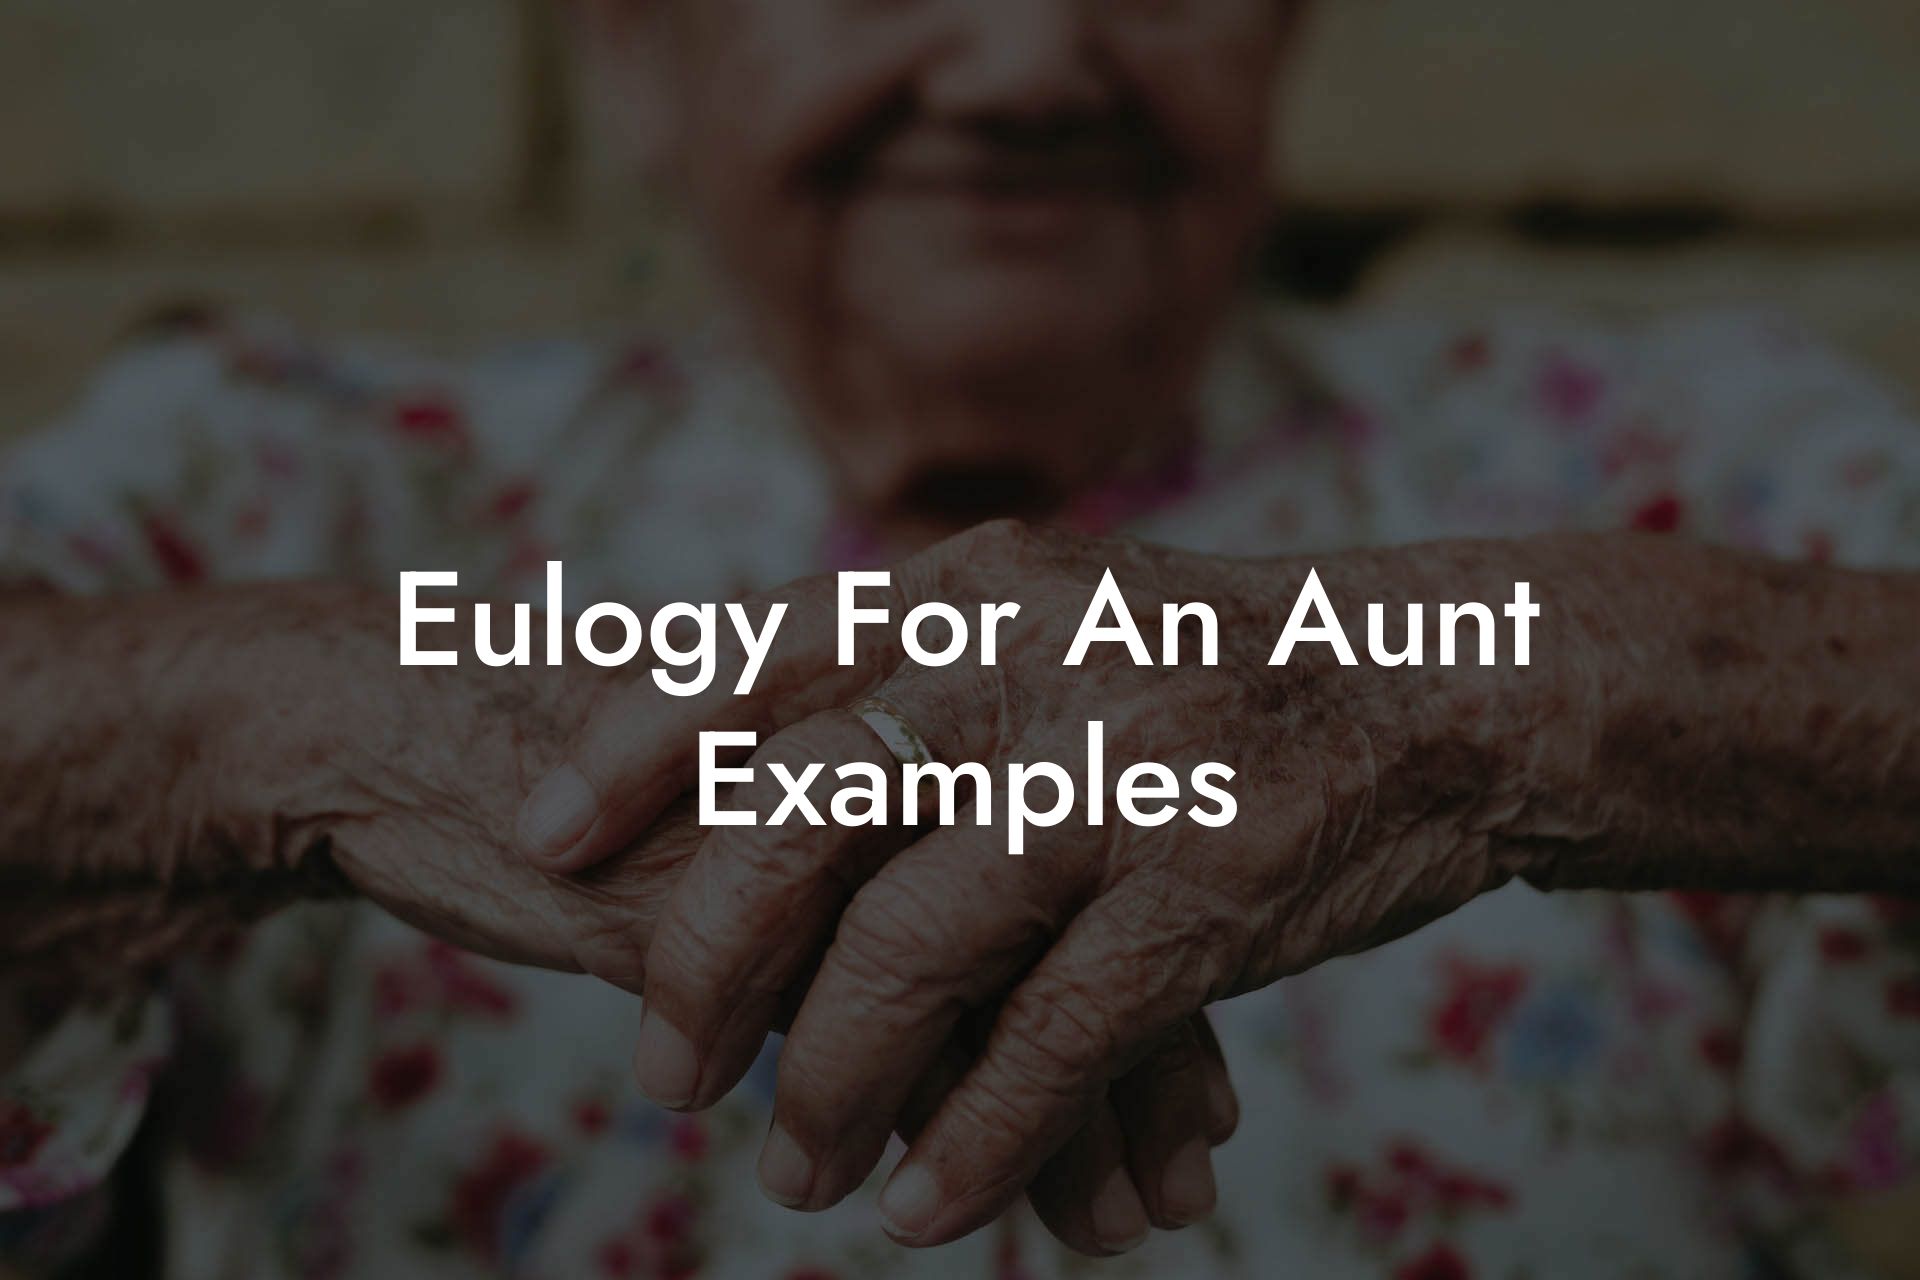 eulogy-for-an-aunt-examples-eulogy-assistant